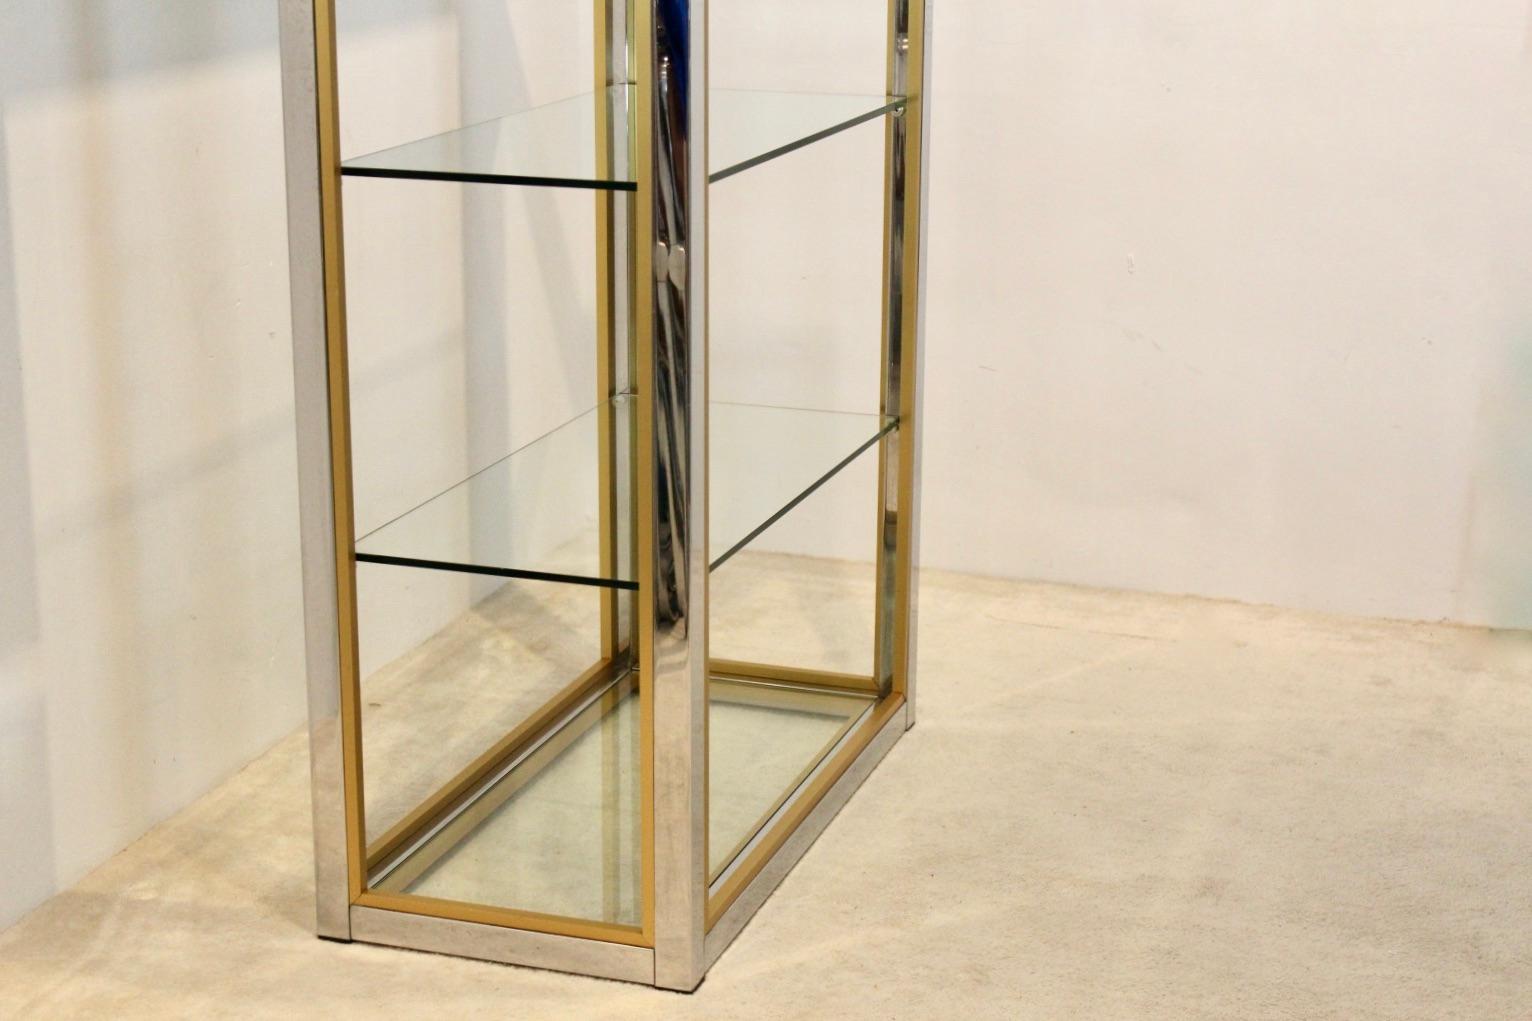 Sophisticated self-supporting shelving unit in brass and chrome a solid frame, made in Italy, 1970s. The piece consists of five glass shelves. The unit is free standing so it can be used on both sides, hence it can also be used as room divider. Its